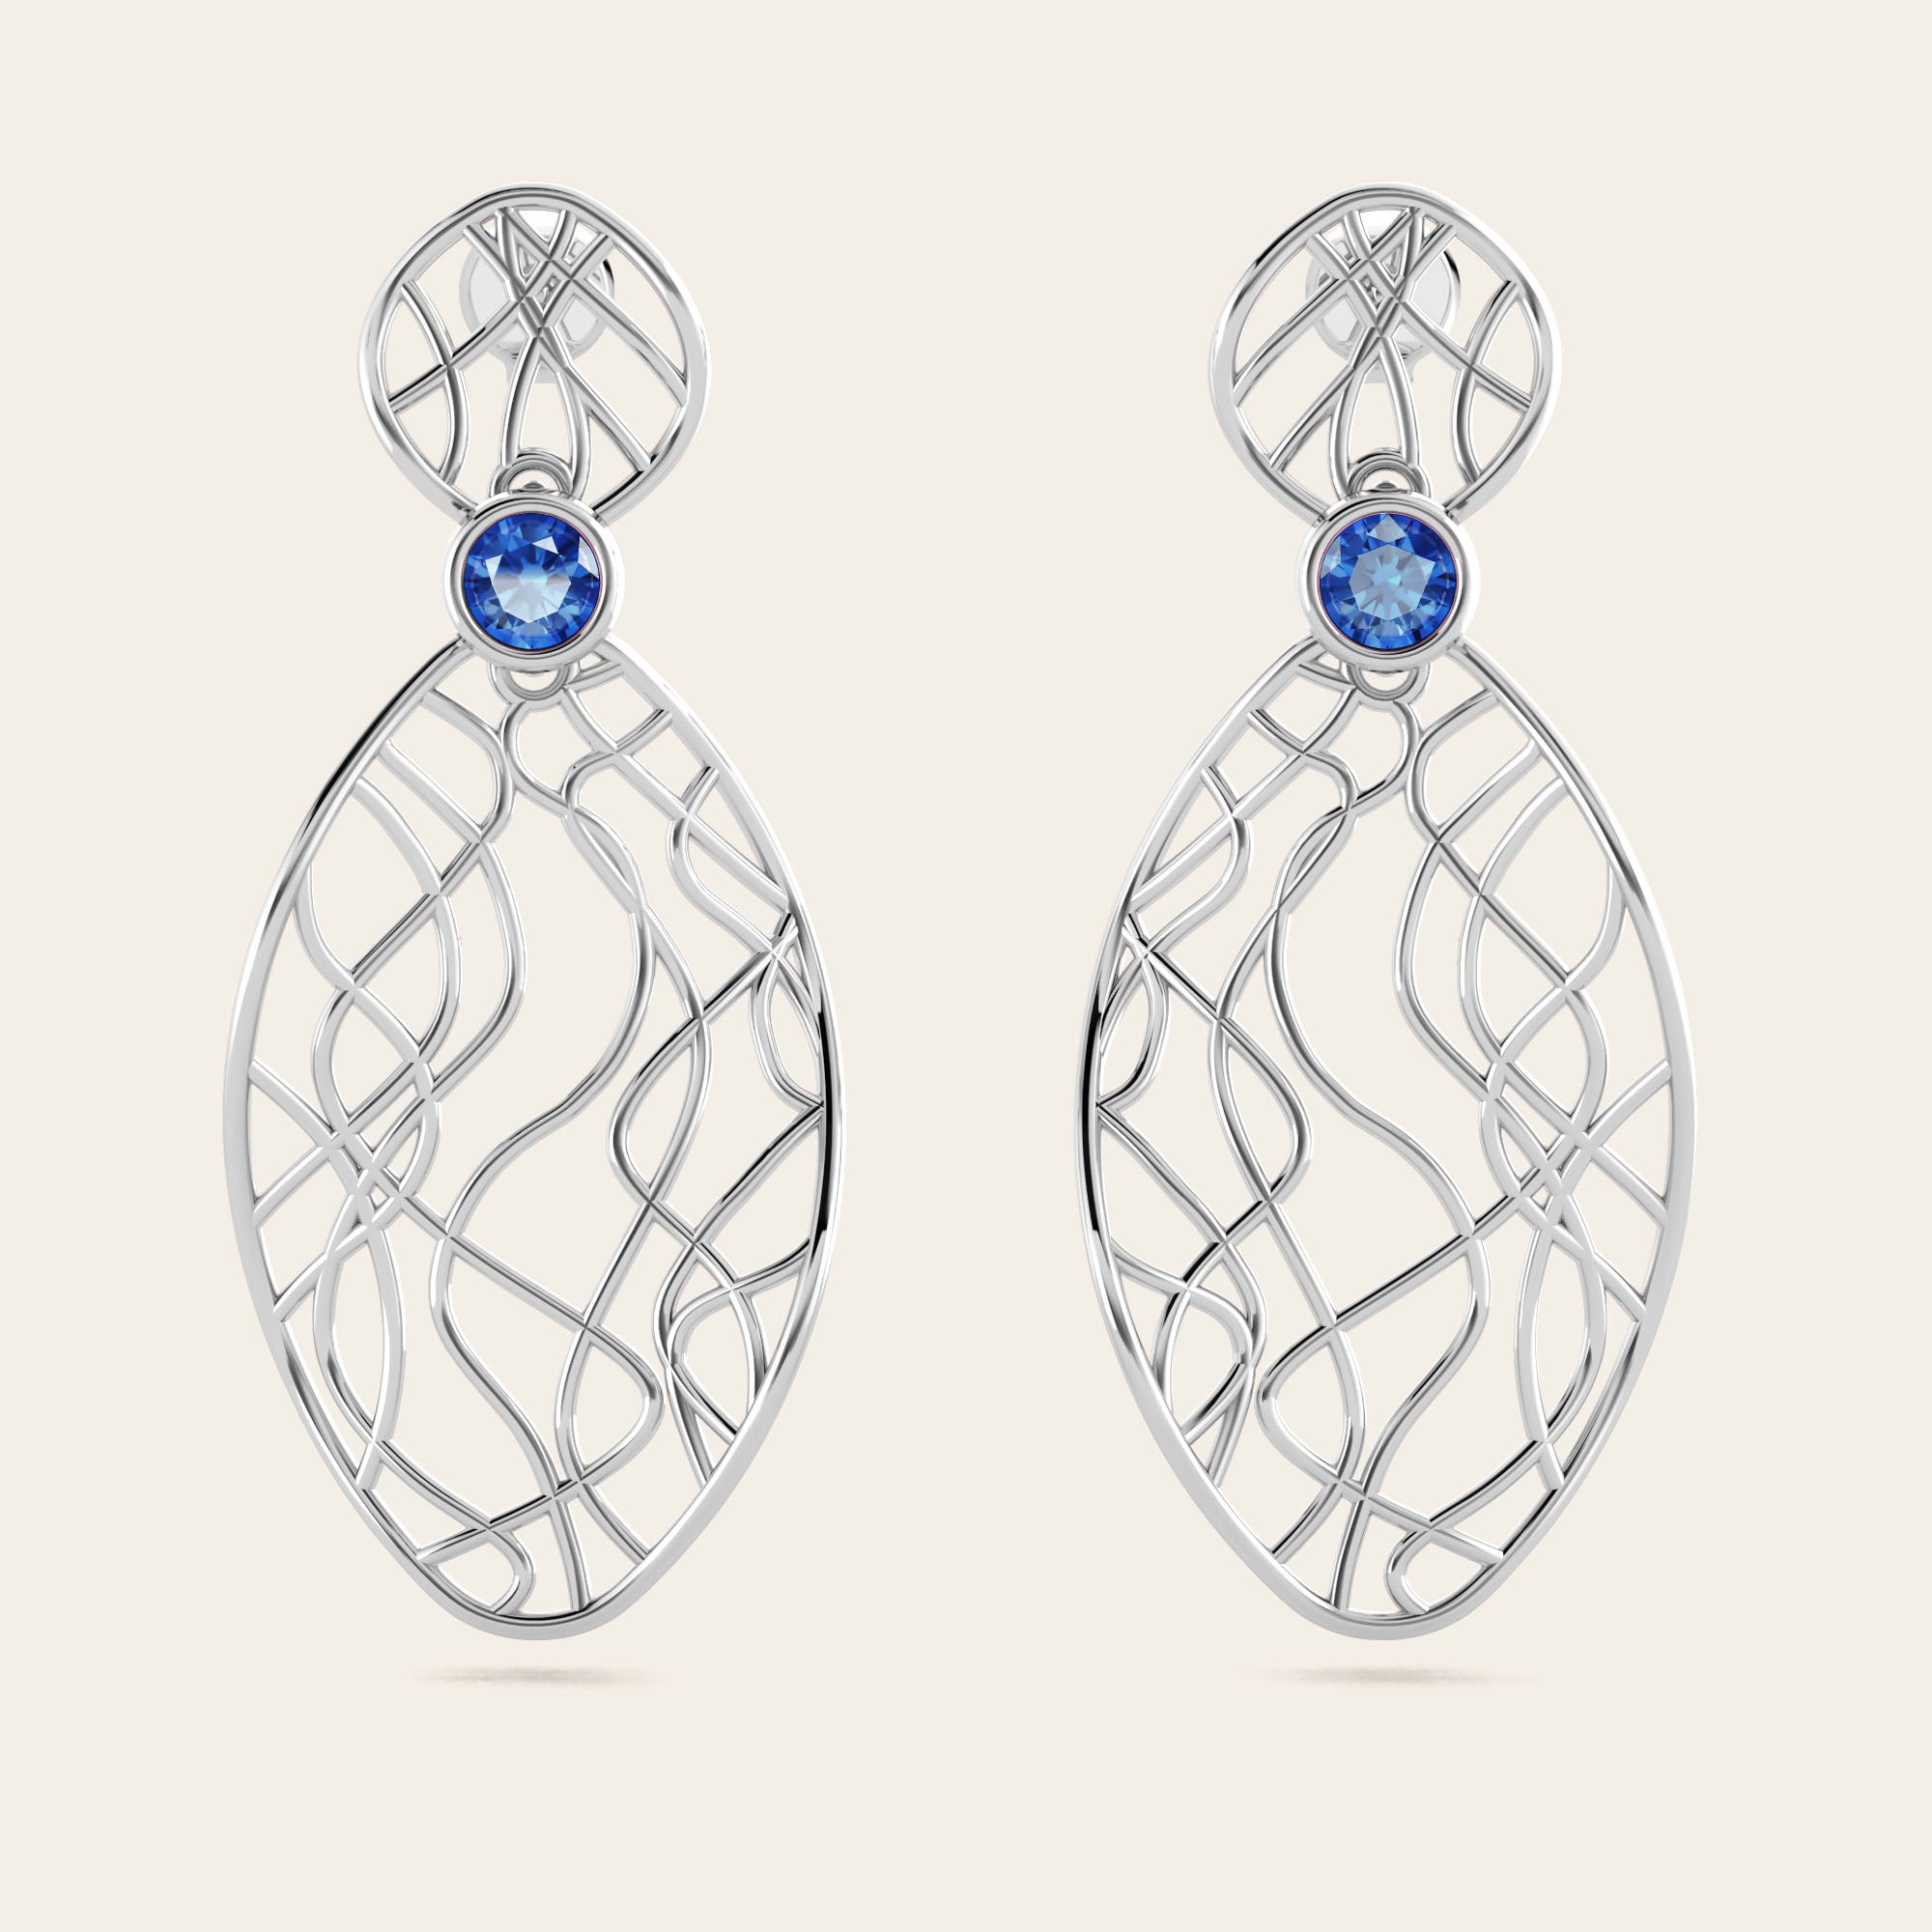 Cascade Dangle Earrings with Blue Sapphires in 18k White Gold